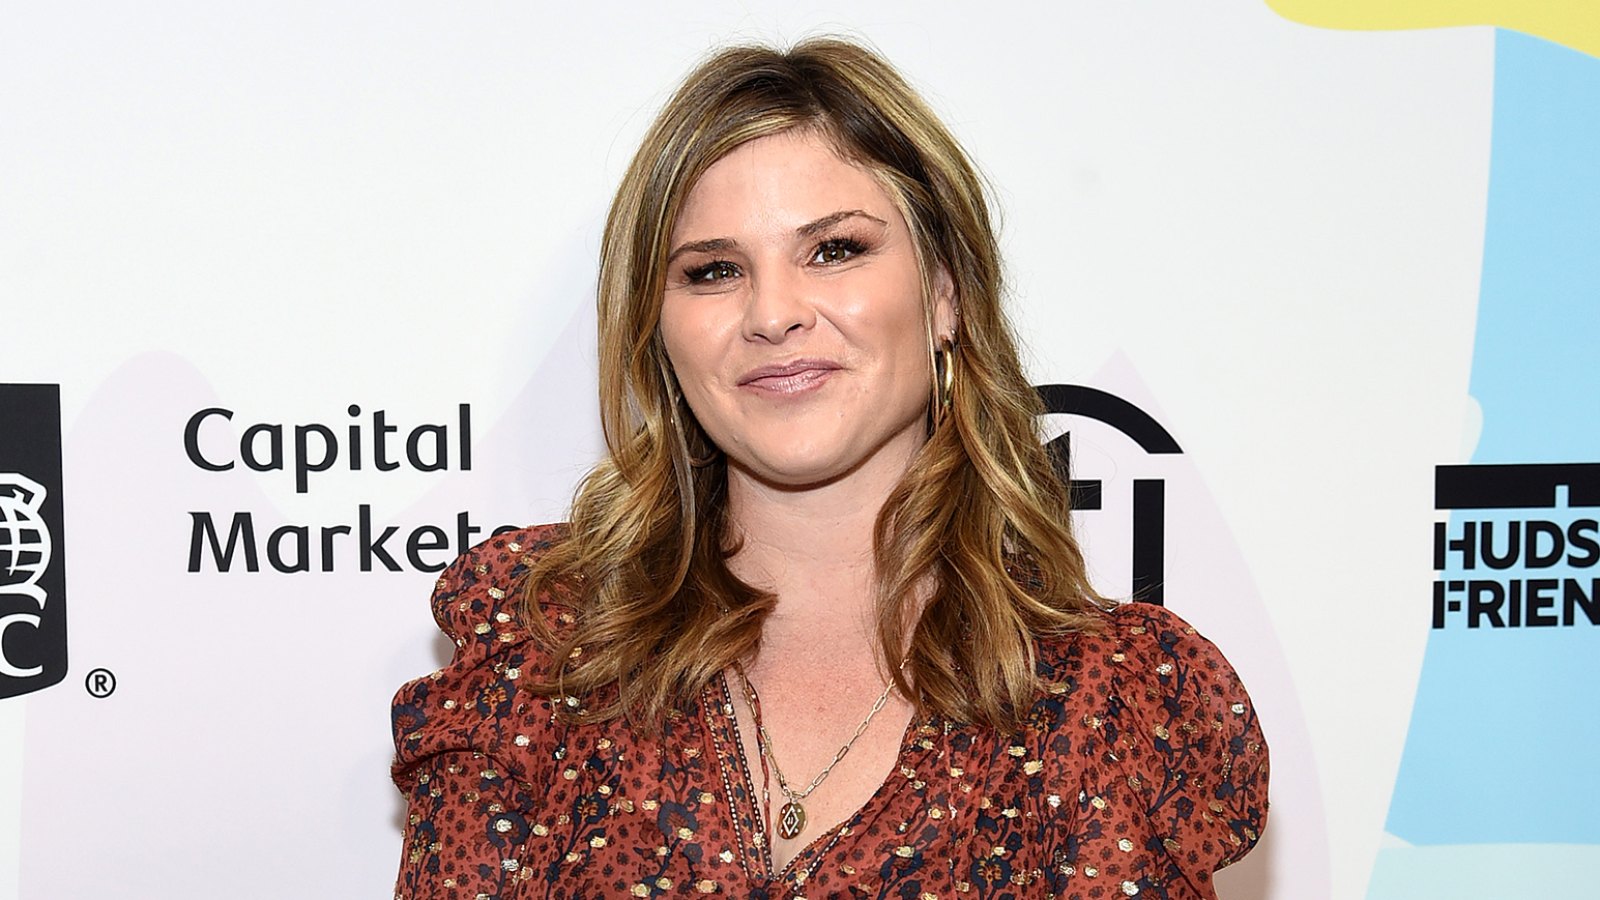 Jenna Bush Hager Was Sent Actual Dirt While Pregnant So Her Kids Could Be 'Born on Texas Soil'